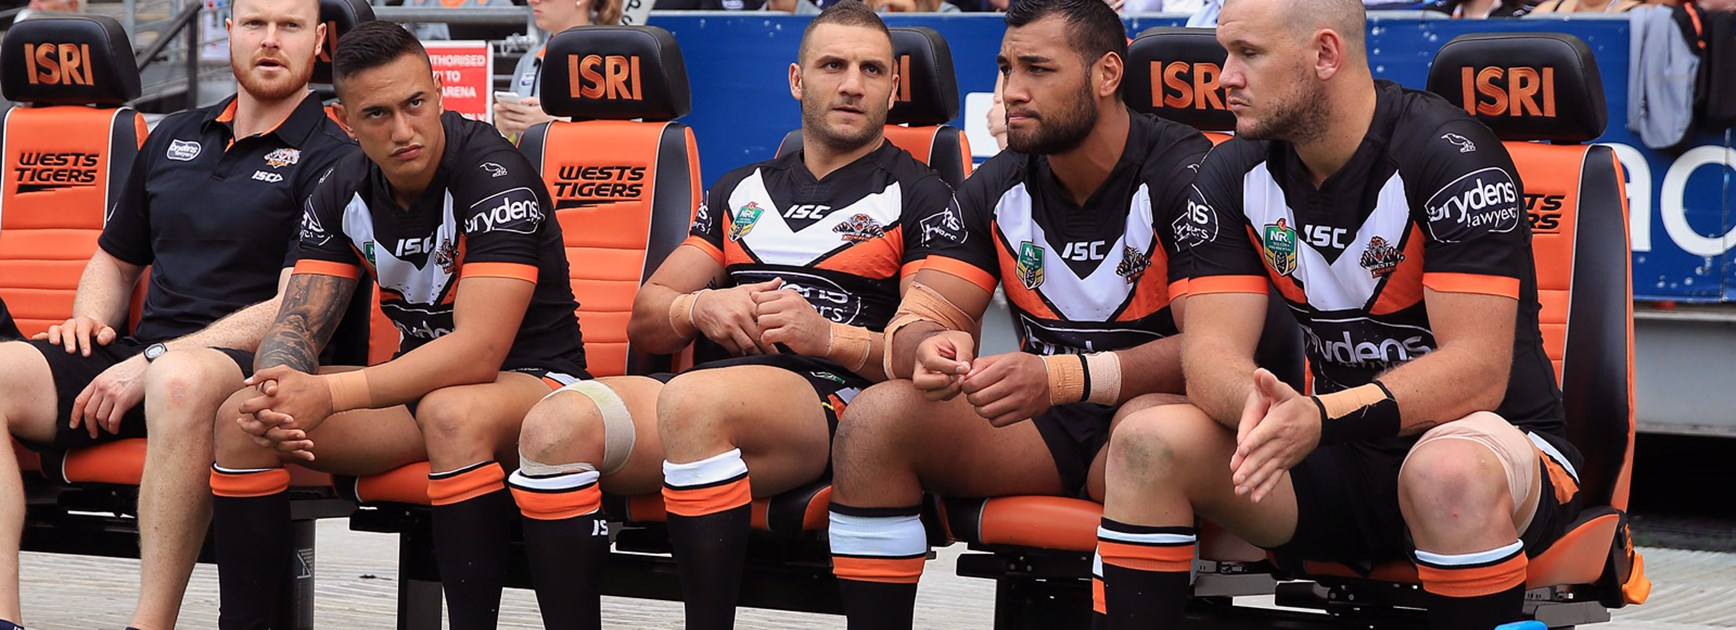 Wests Tigers hooker Robbie Farah will start from the bench against the Rabbitohs in Round 14.